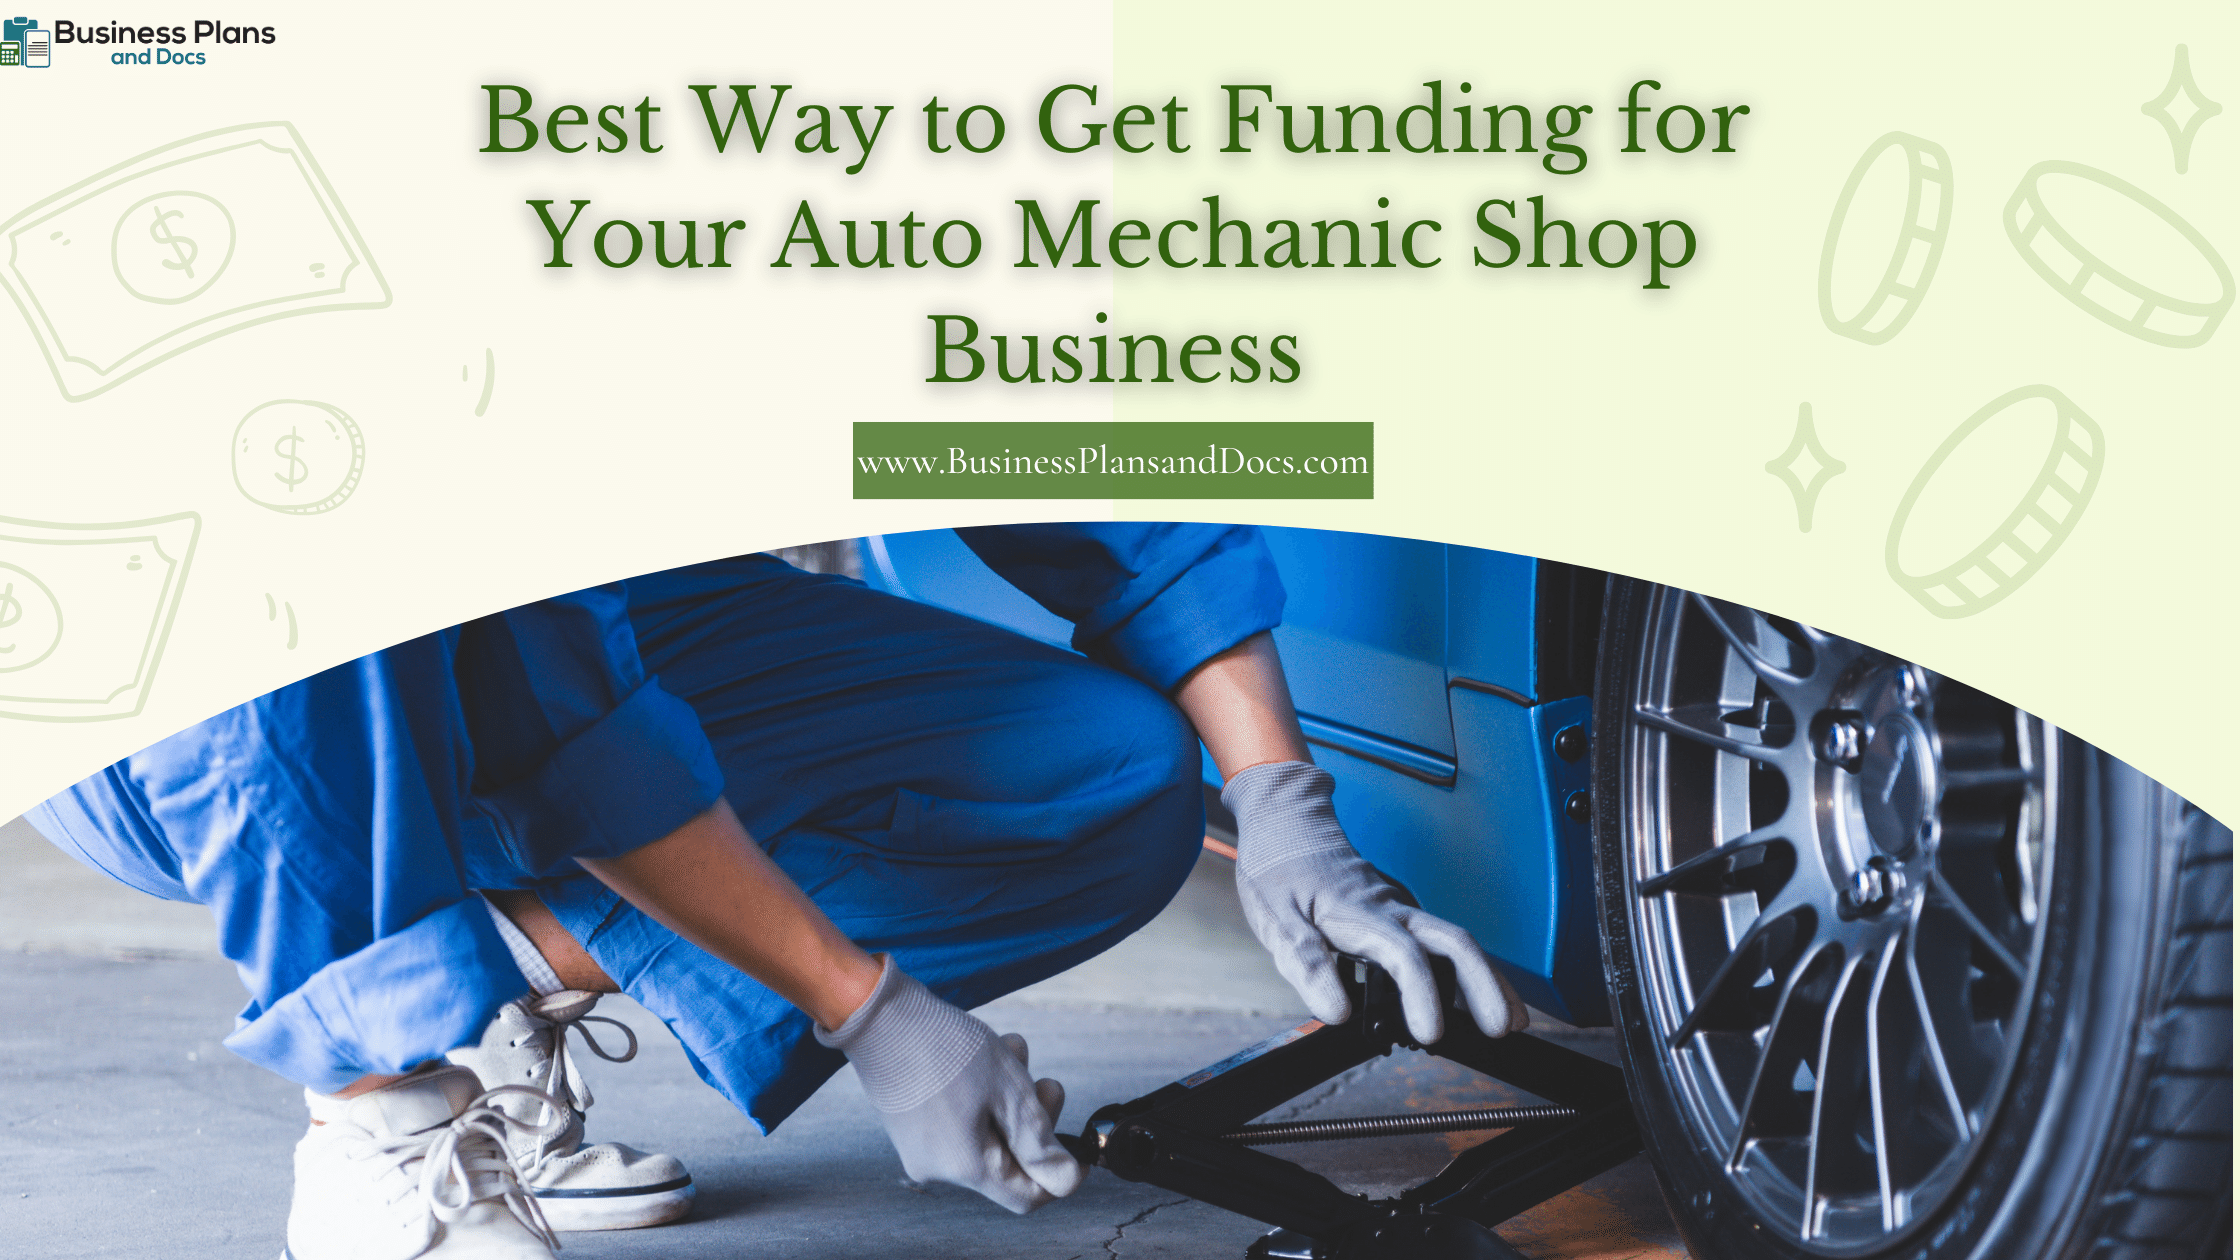 Best Way to Get Funding for Your Auto Mechanic Shop Business